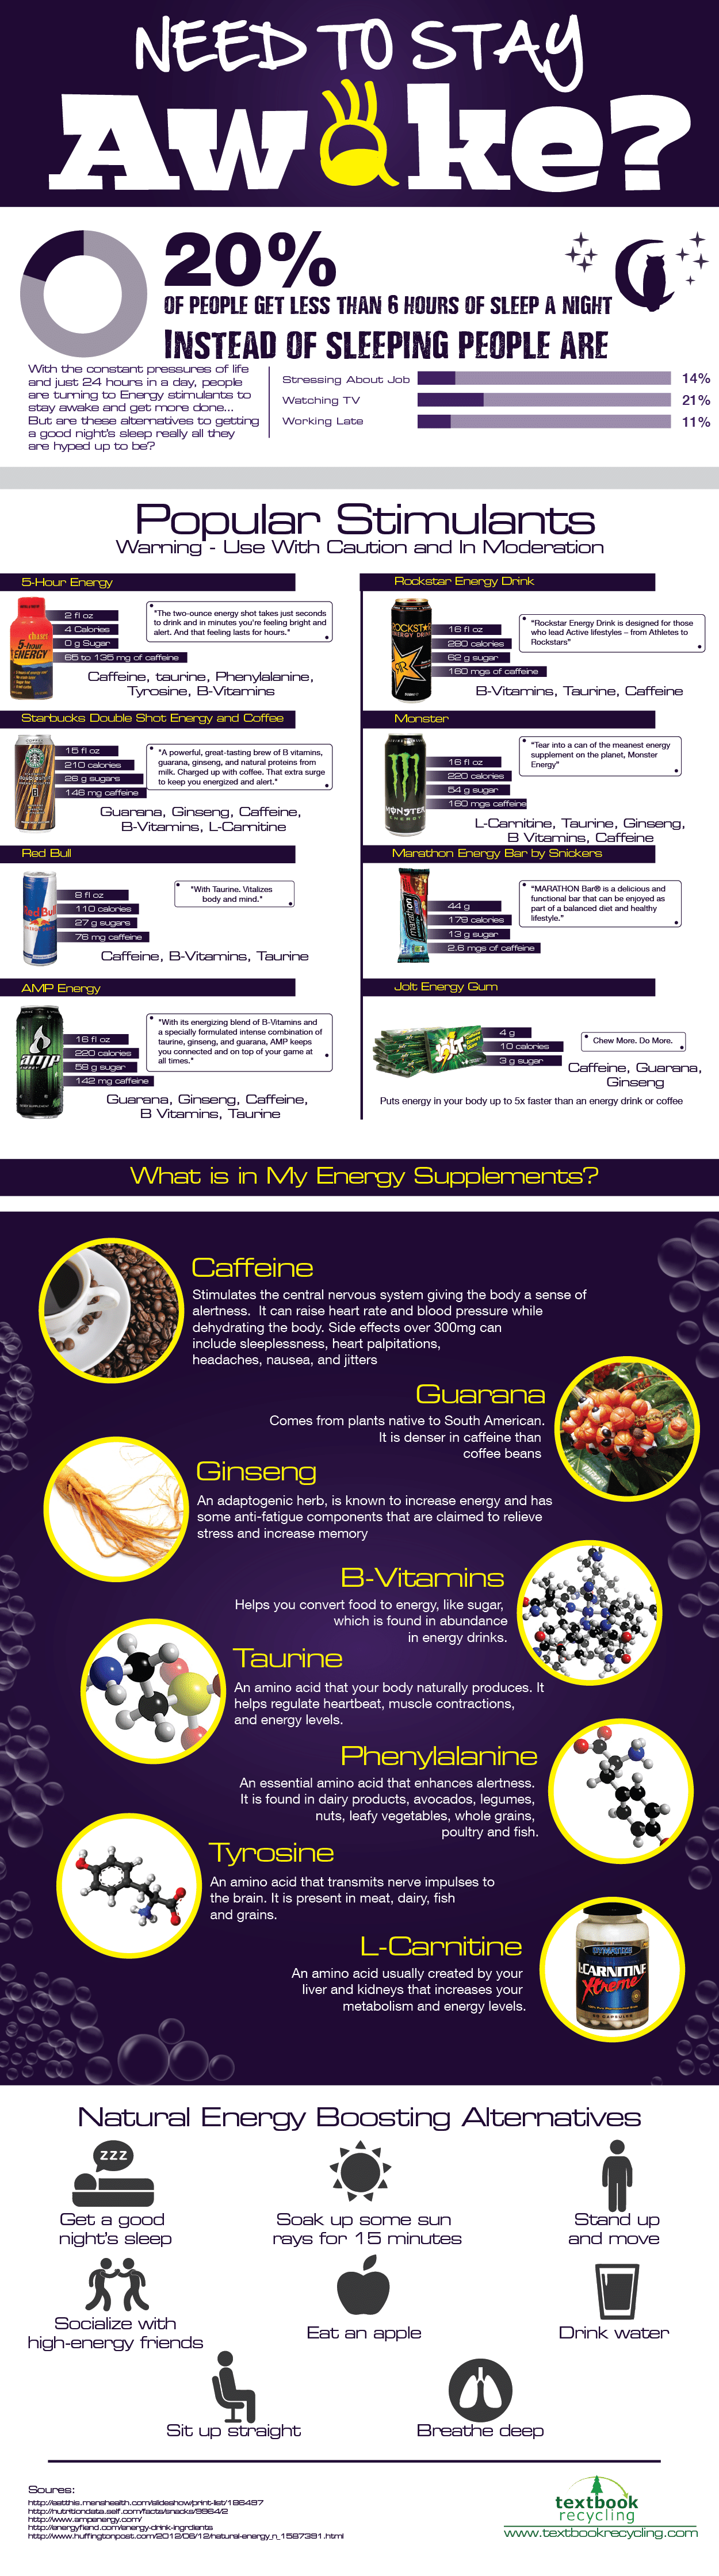 how-to-stay-awake-infographic